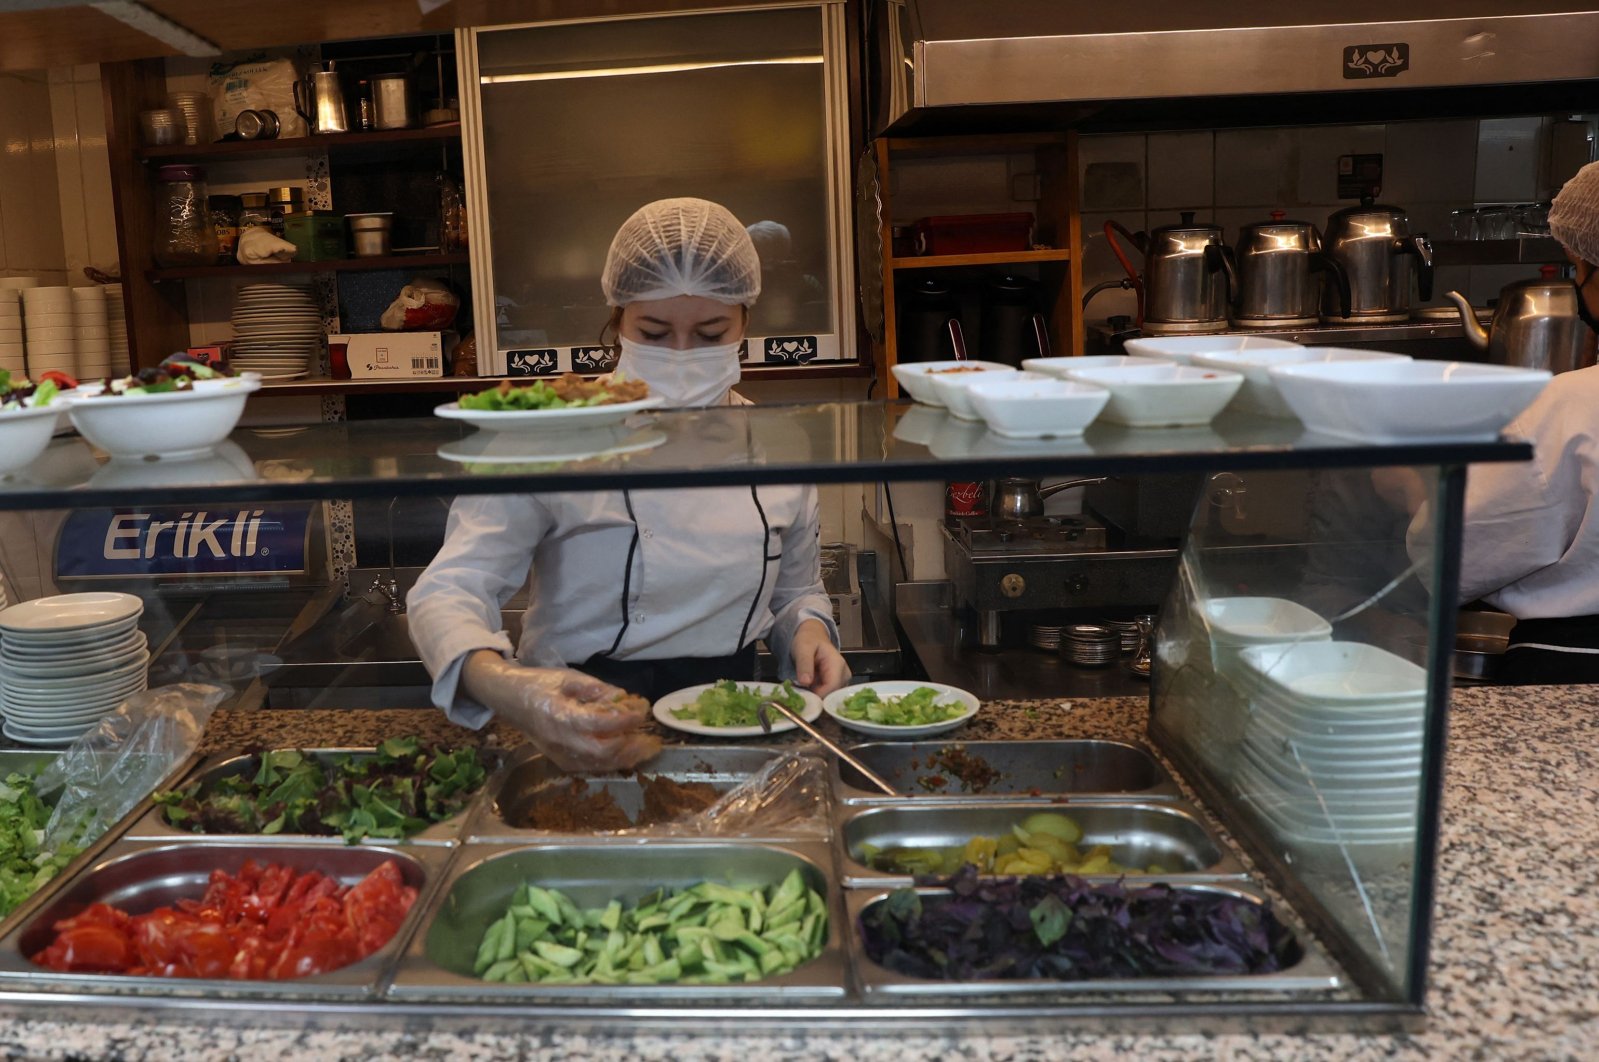 Chefs wearing masks prepare meals for customers at a restaurant in the capital Ankara, Turkey, June 2, 2021. (AFP PHOTO)